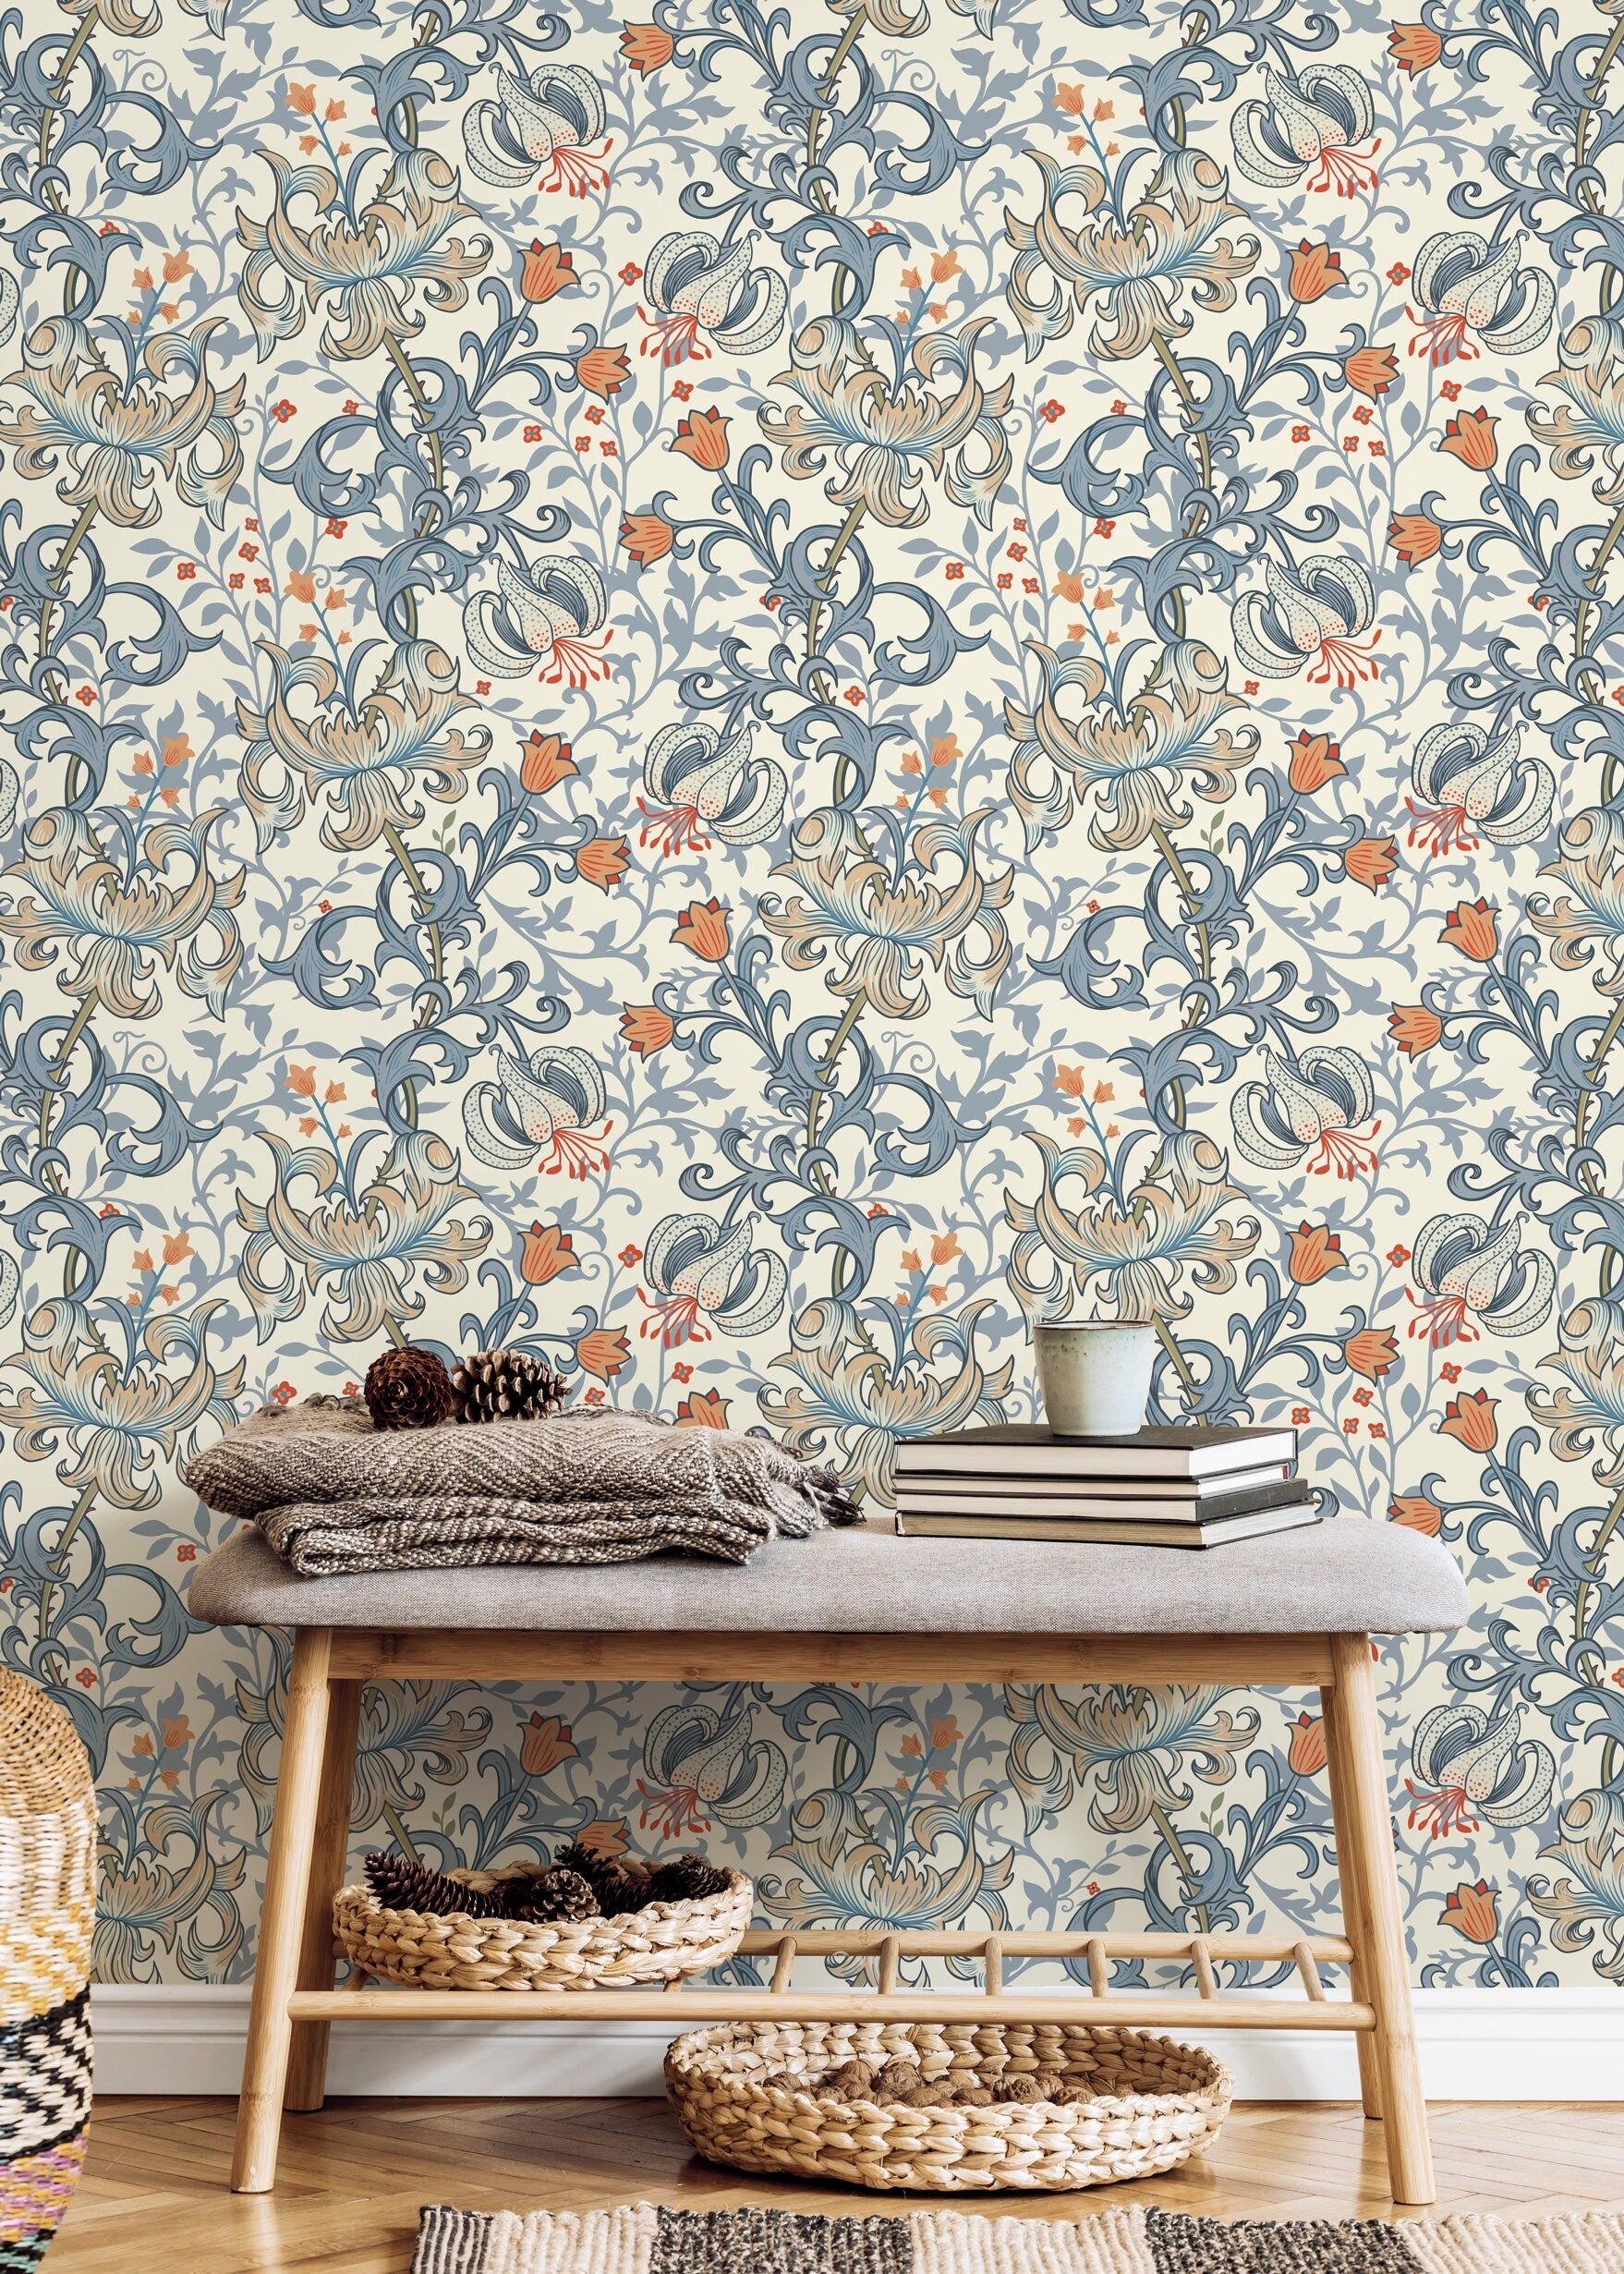 NextWall 3075 sq ft Daydream Grey  Pearl Blue Morris Flower Vinyl Peel  and Stick Wallpaper Roll NW41508  The Home Depot